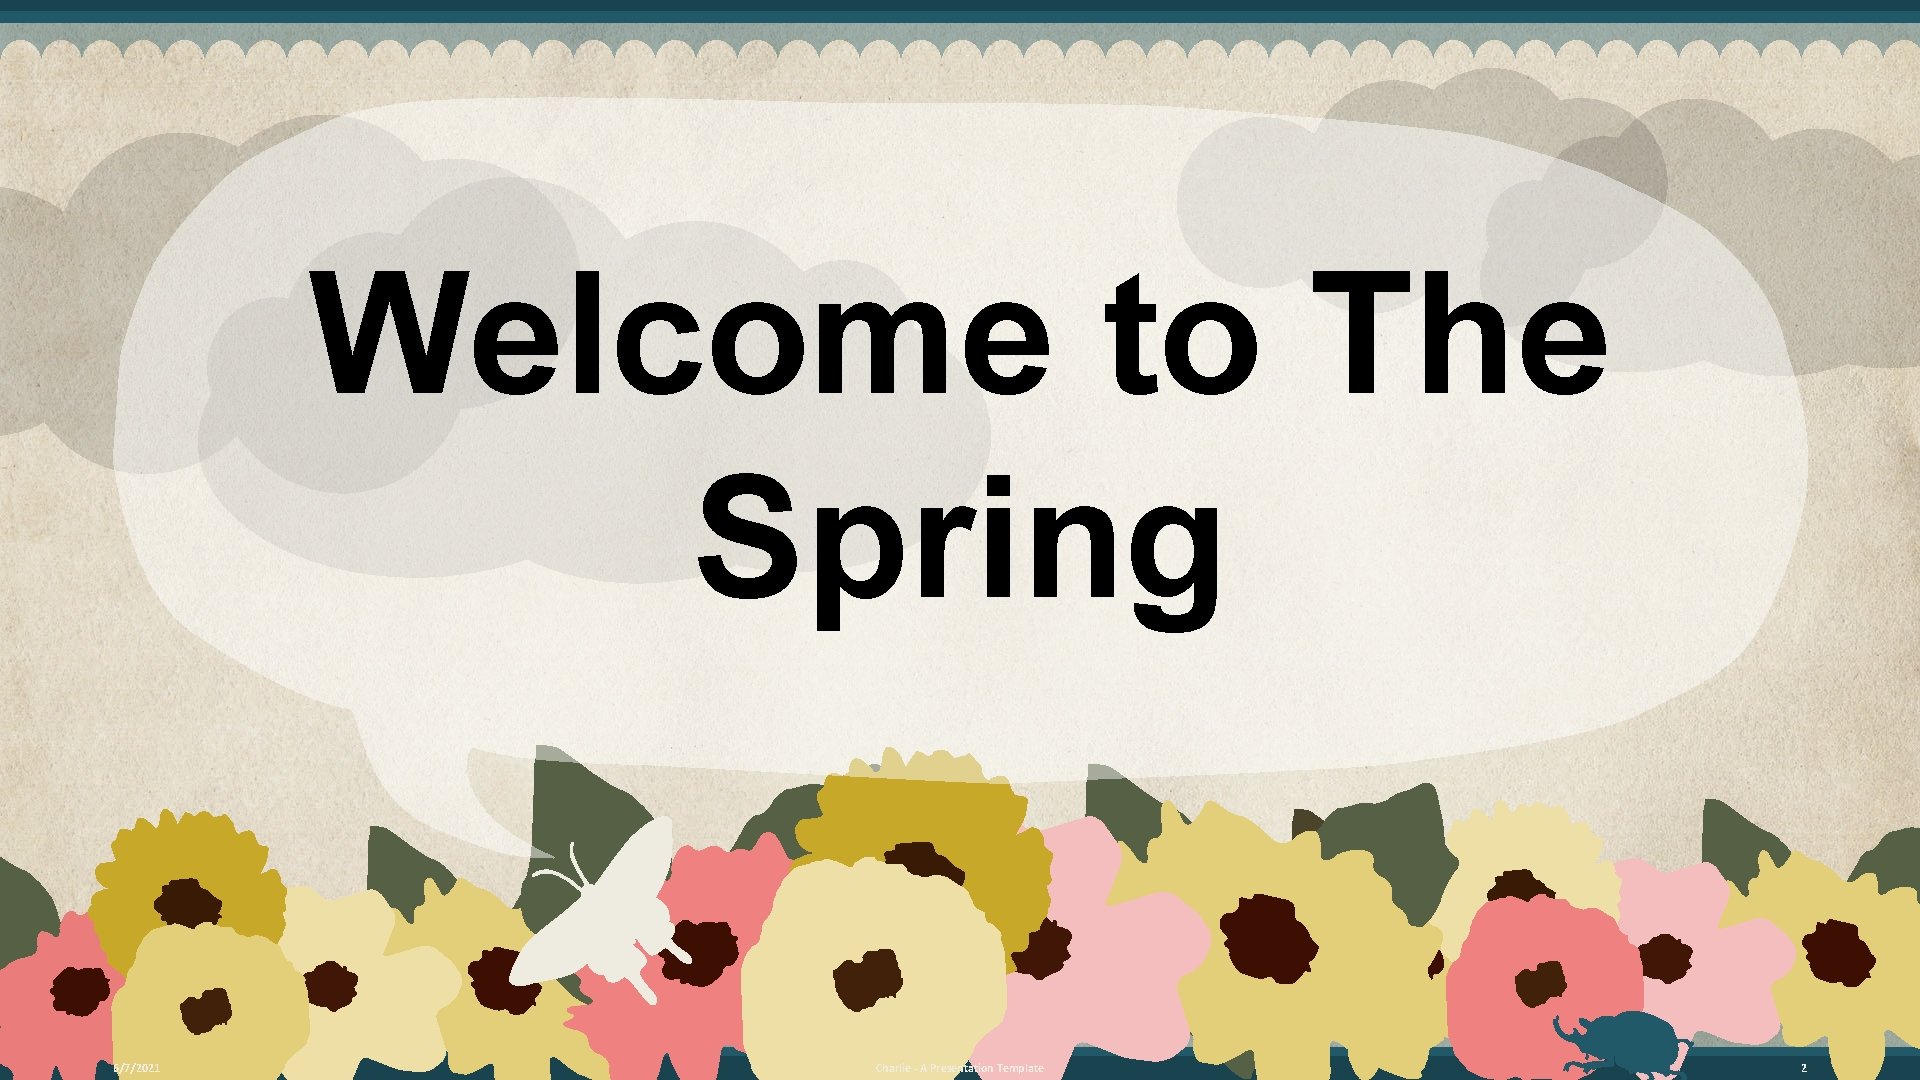 Welcome to The Spring 6/7/2021 Charlie - A Presentation Template 2 